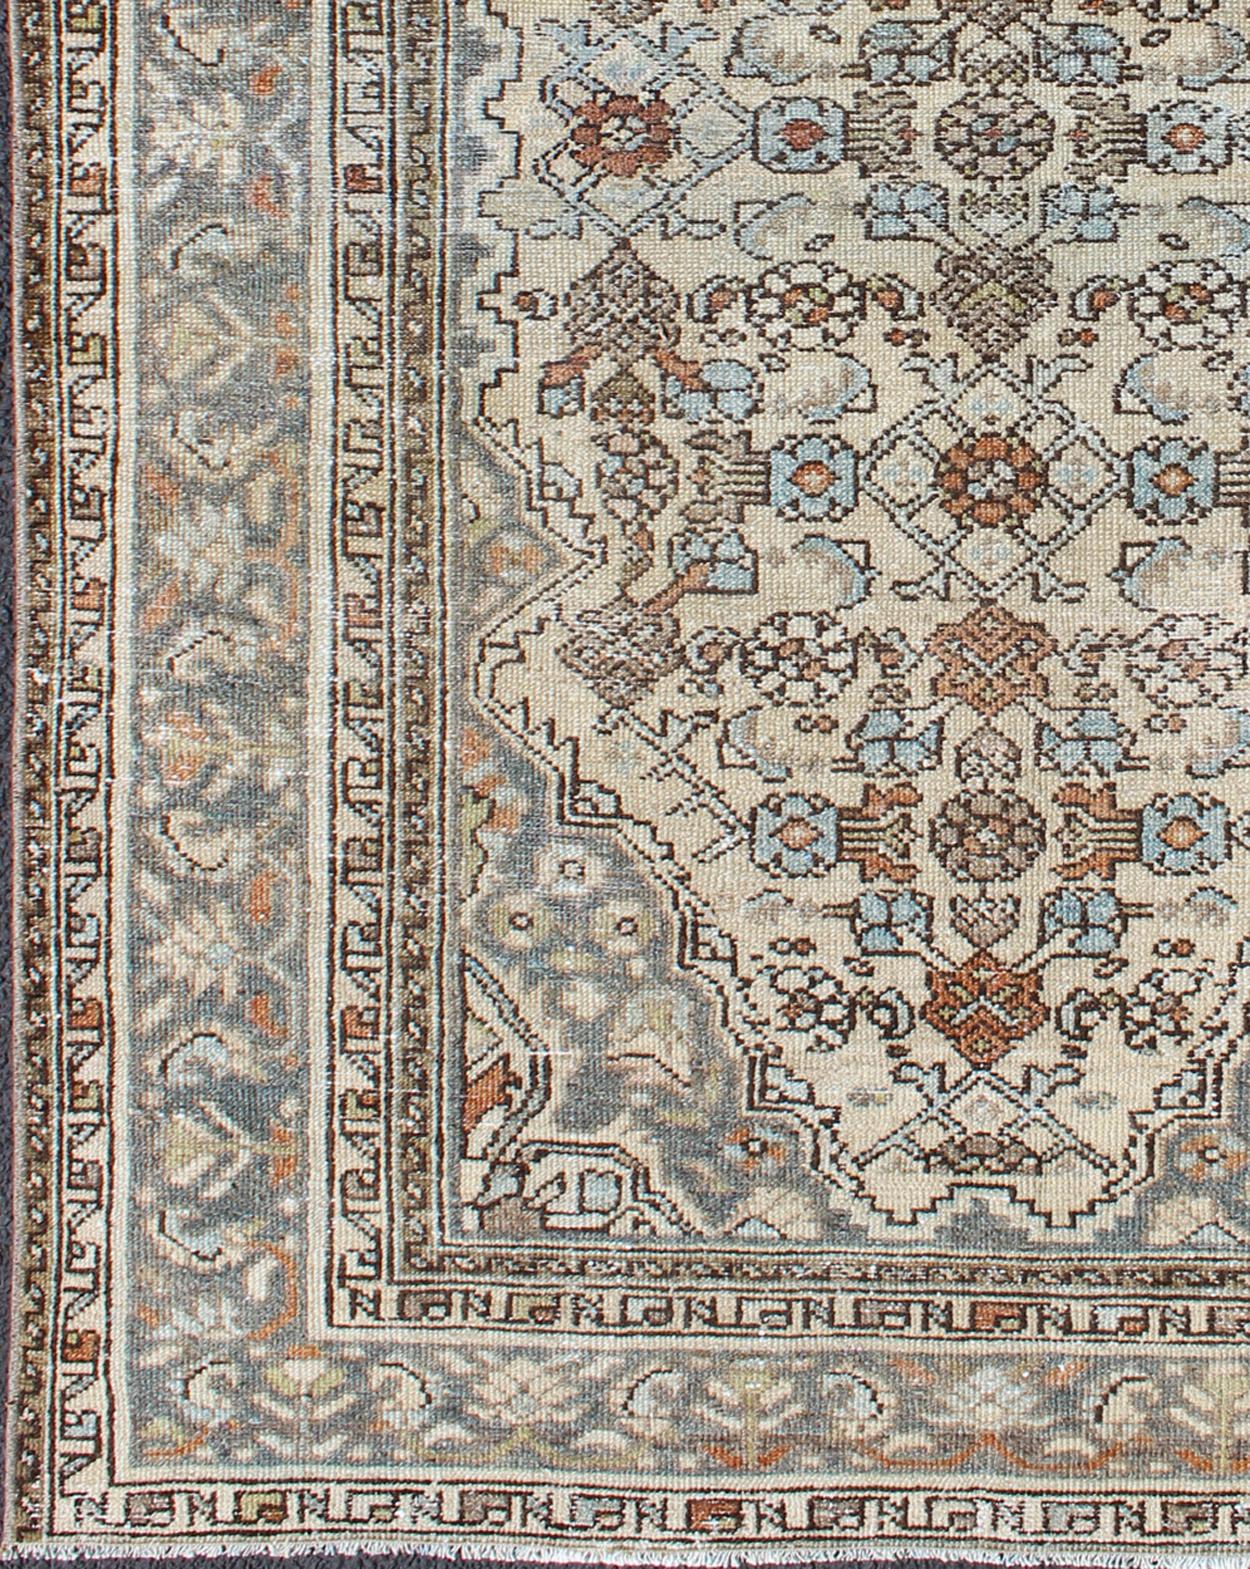 Neutral tones antique Malayer rug from Persia with floral design, rug sus-1807-240, country of origin / type: Iran / Malayer, circa 1920.

This beautiful antique early 20th century Persian Malayer carpet features a beautiful all-over design of